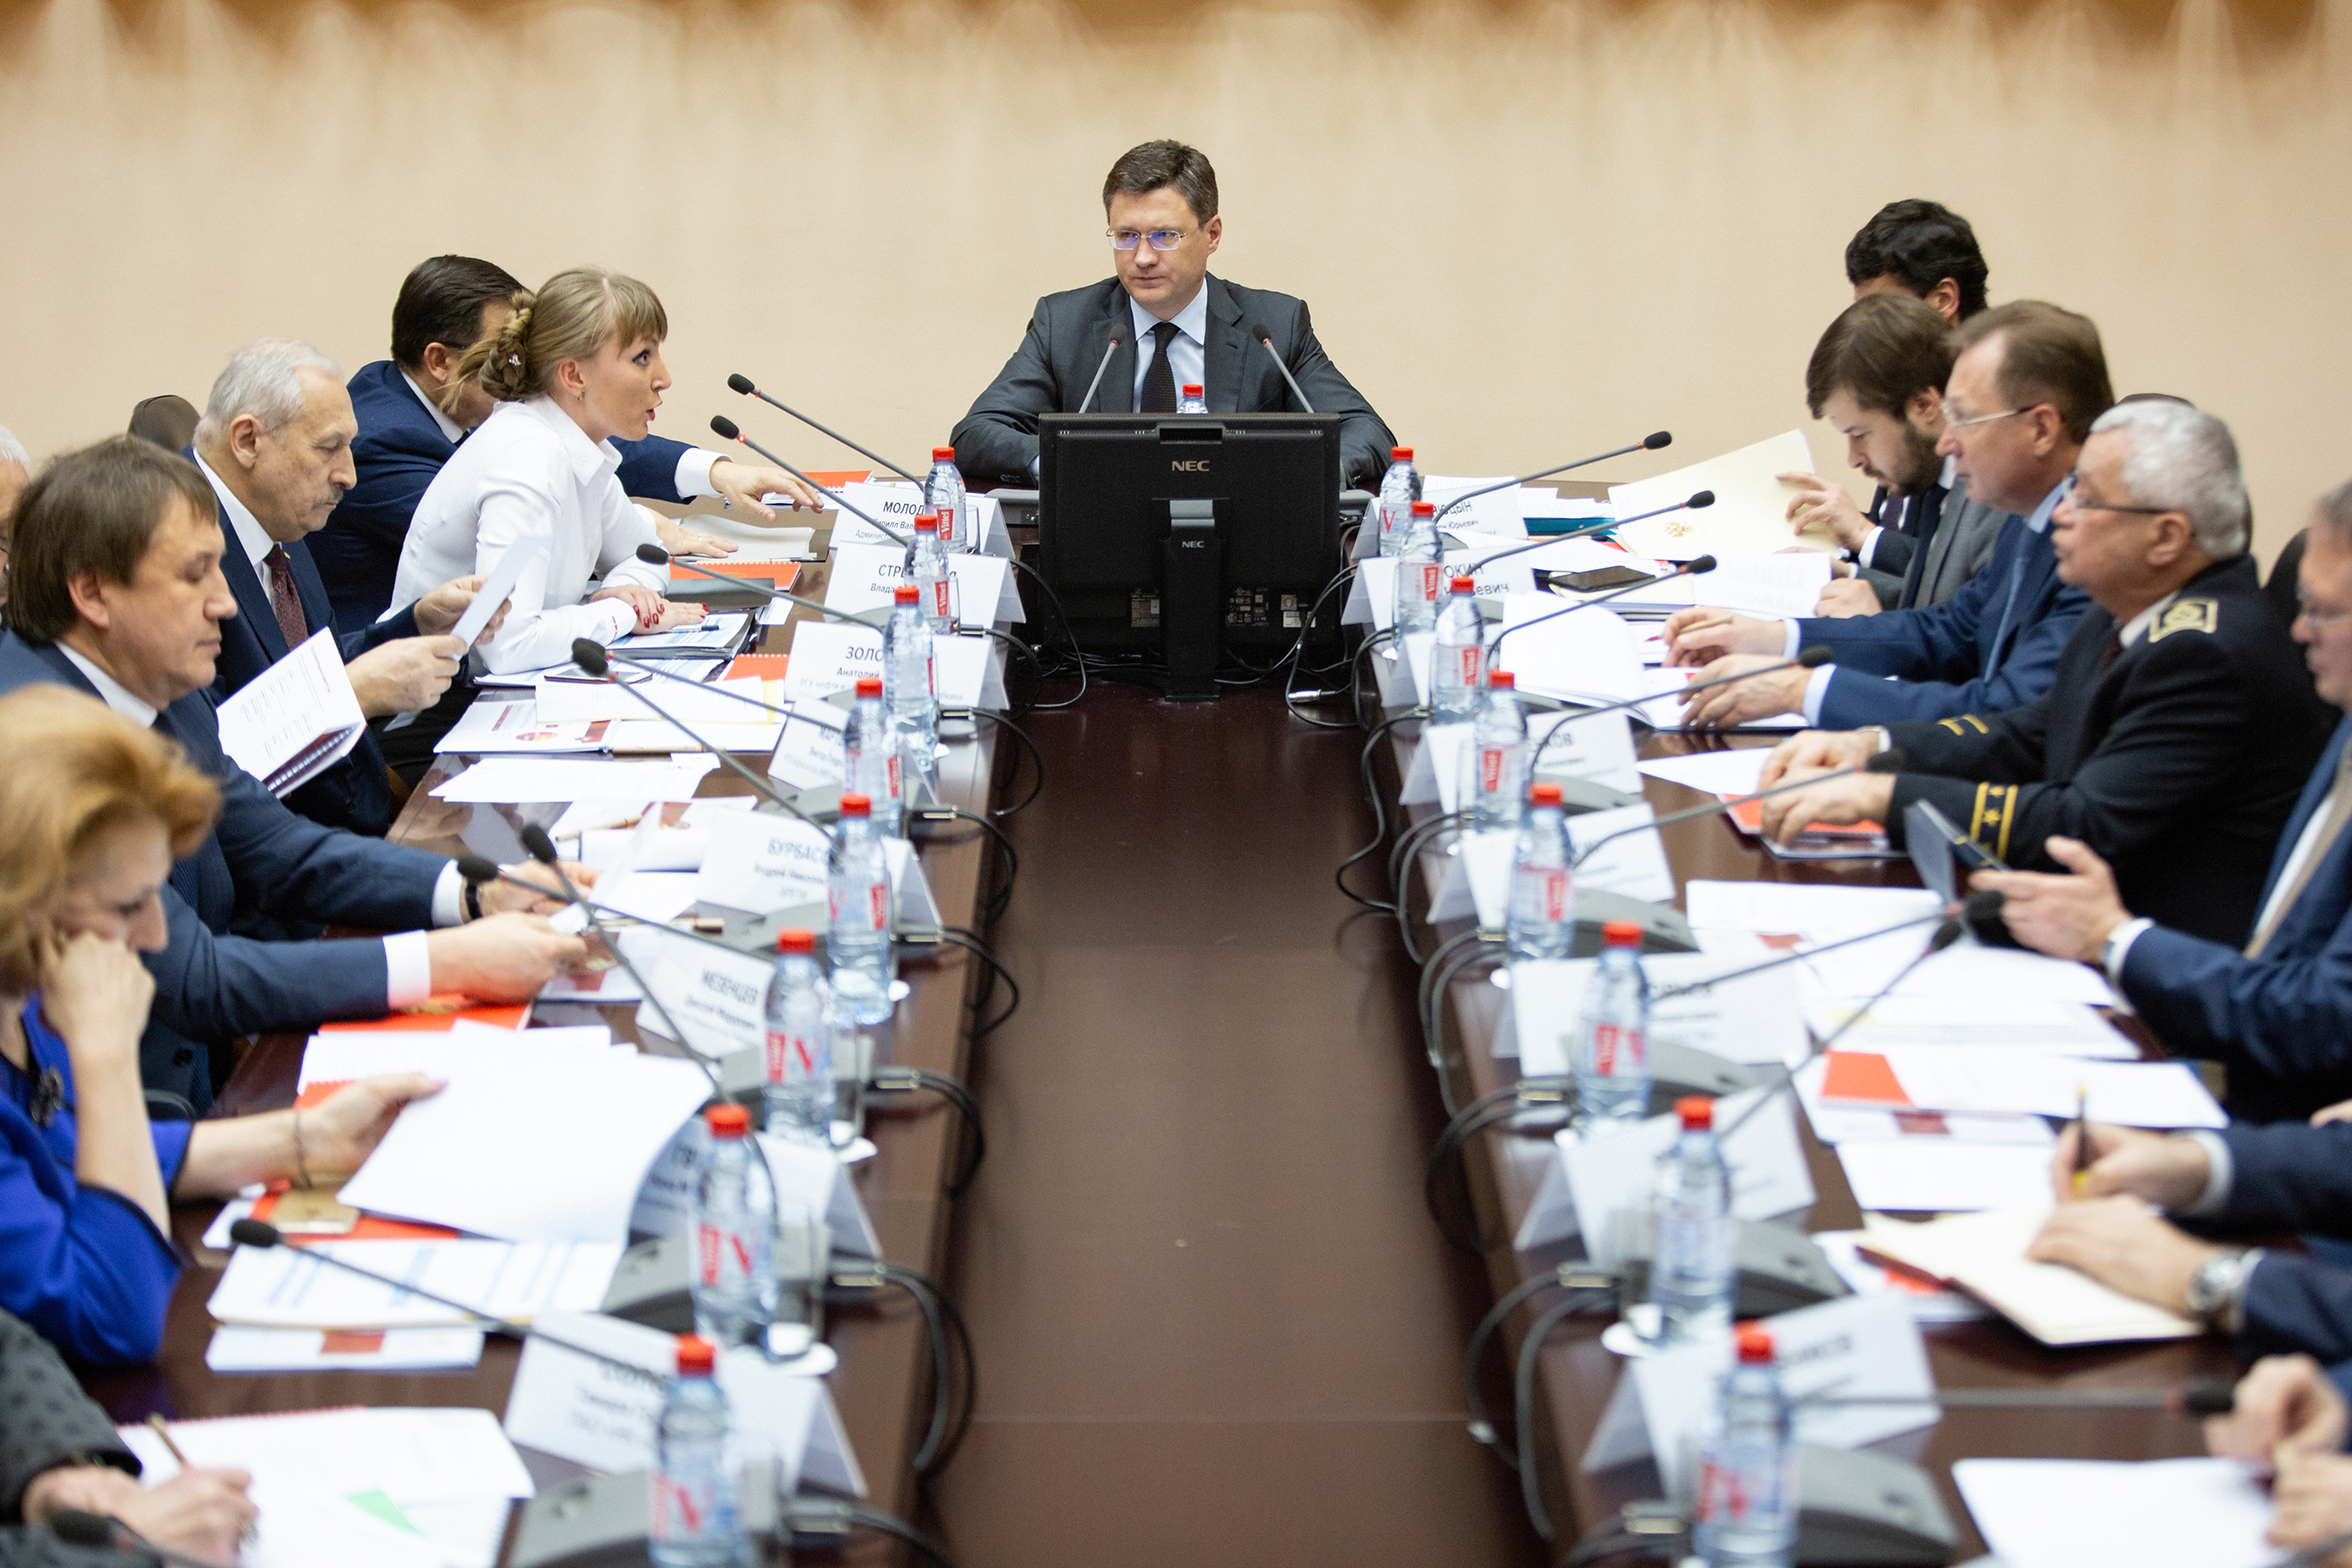 The Organising Committee of the 6th Future Leaders Forum approved the Technical Programme. The Forum's Gala Opening Ceremony will be held at the Mariinsky Theatre